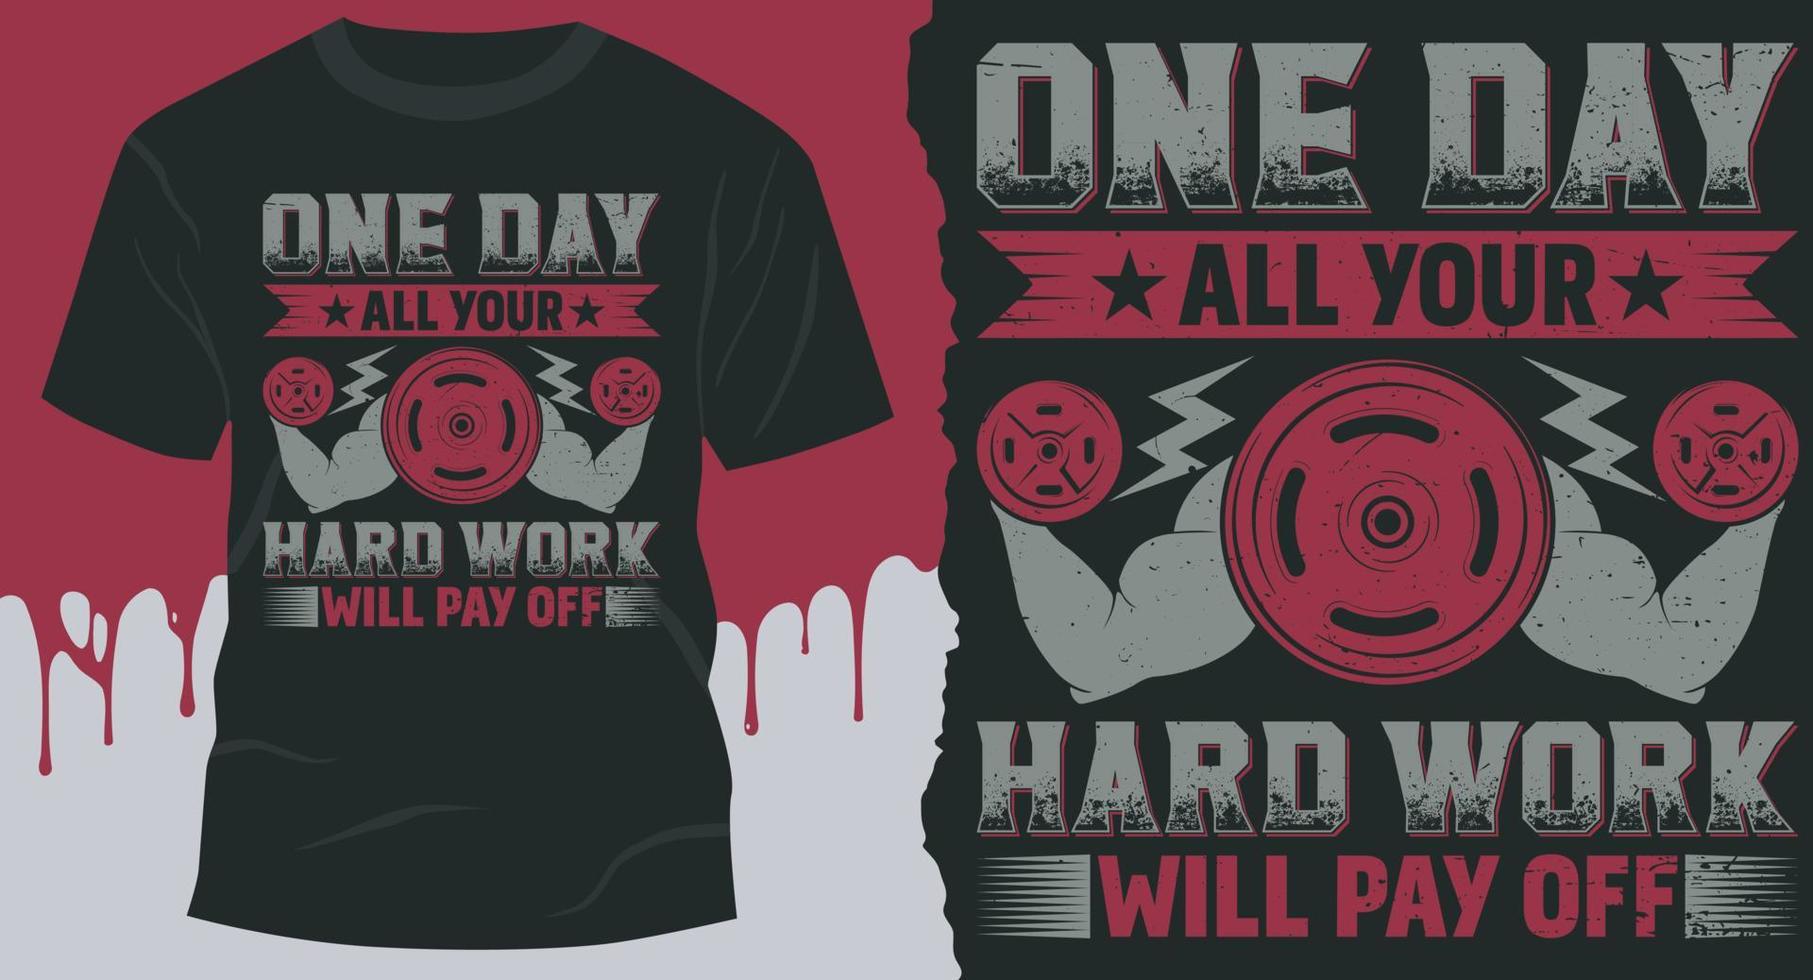 One Day All Your Hard Work Will Pay off. Best idea for motivational gym T-shirt vector